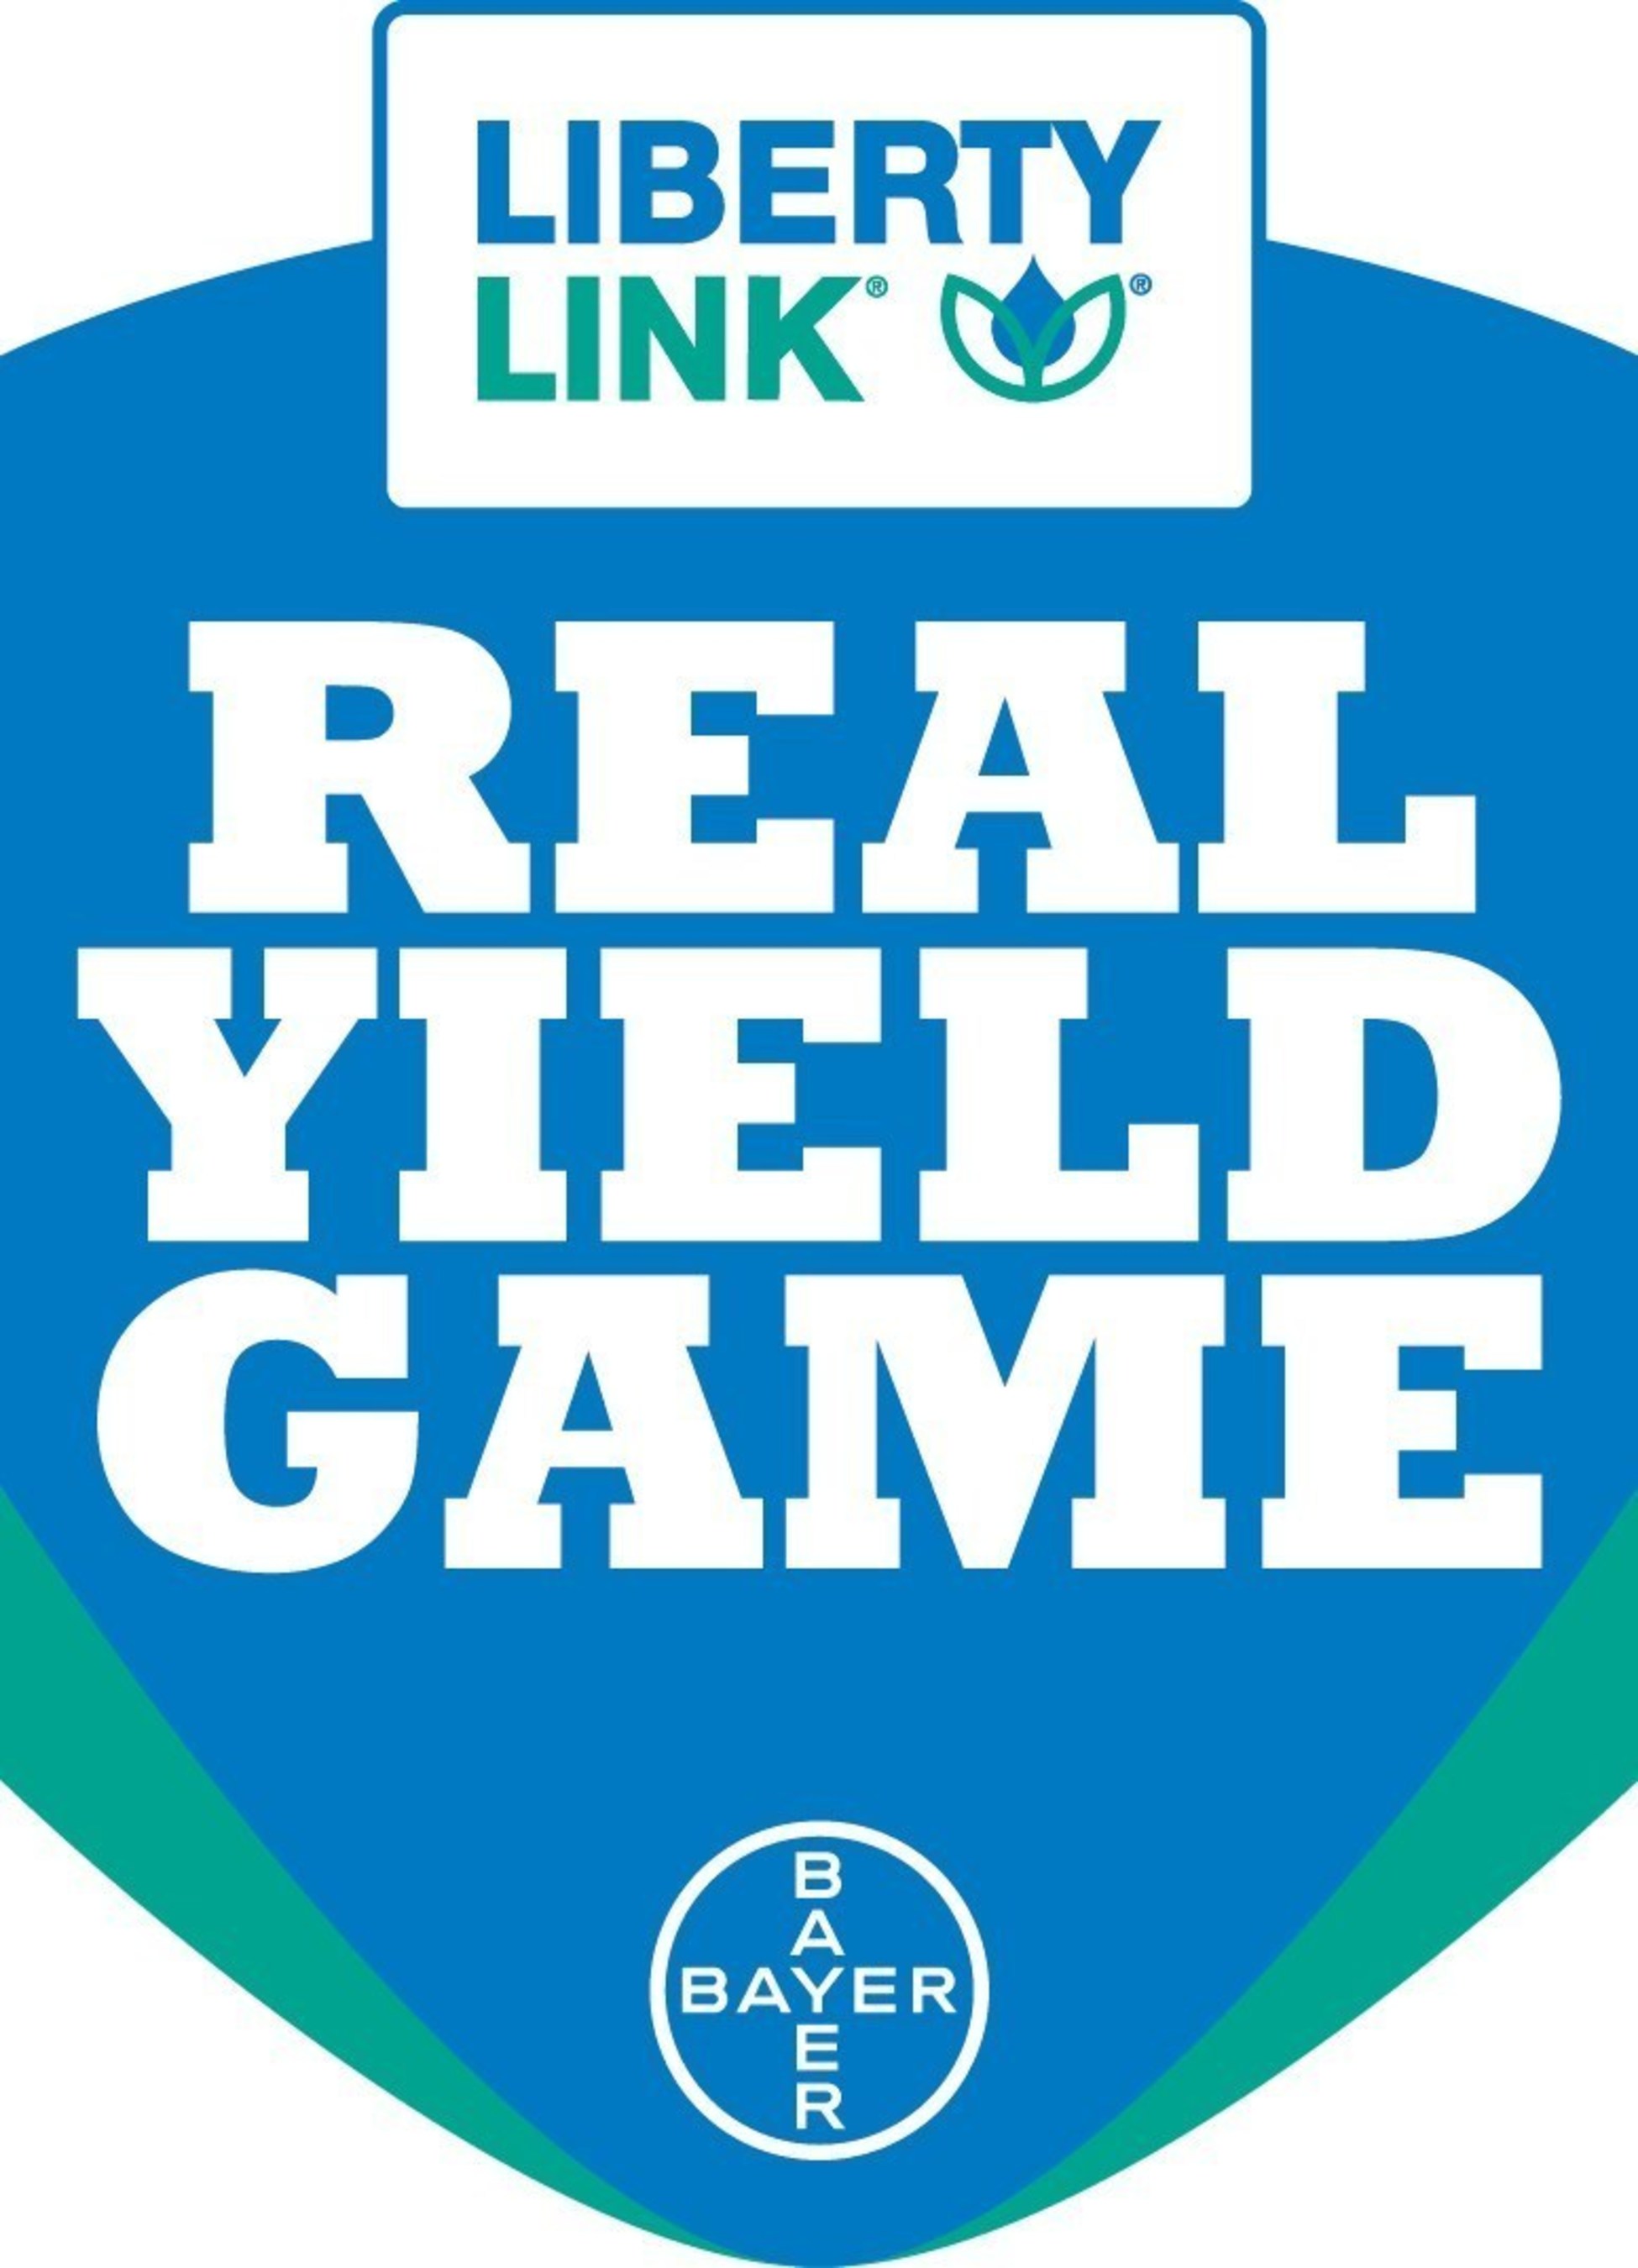 For the second consecutive year, growers can win free seed and herbicide while also raising funds to support their local FFA. To participate, growers simply enter at www.RealYieldSweepstakes.com.